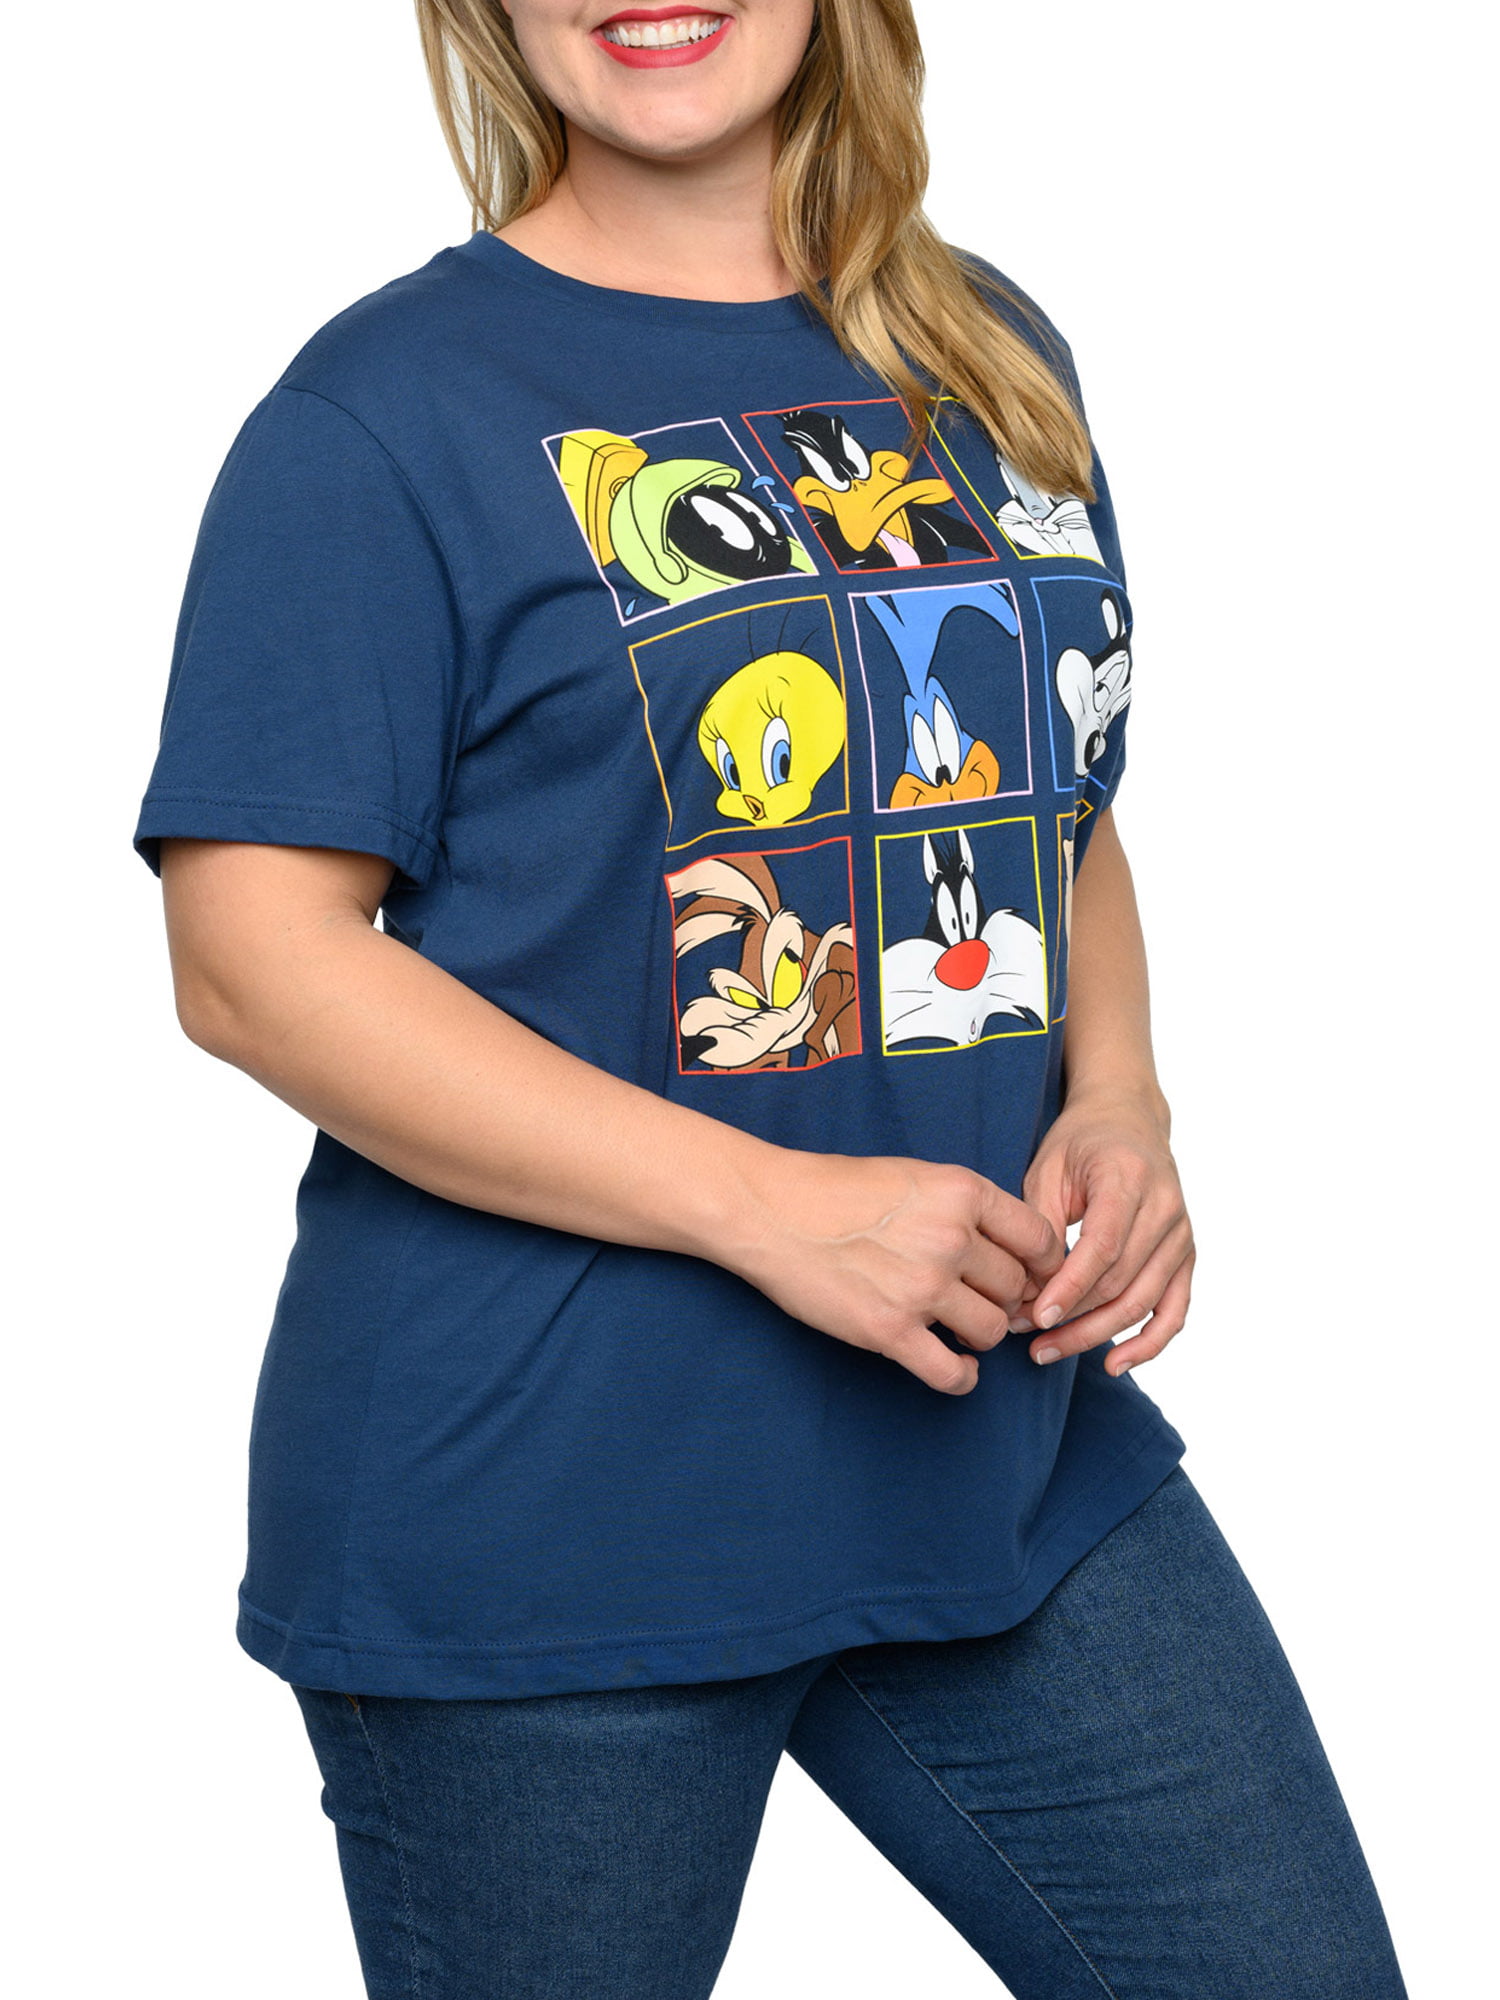 Women's Looney Tunes T-Shirt Plus Size Bugs Bunny Blue Daffy Sylvester  Tweety